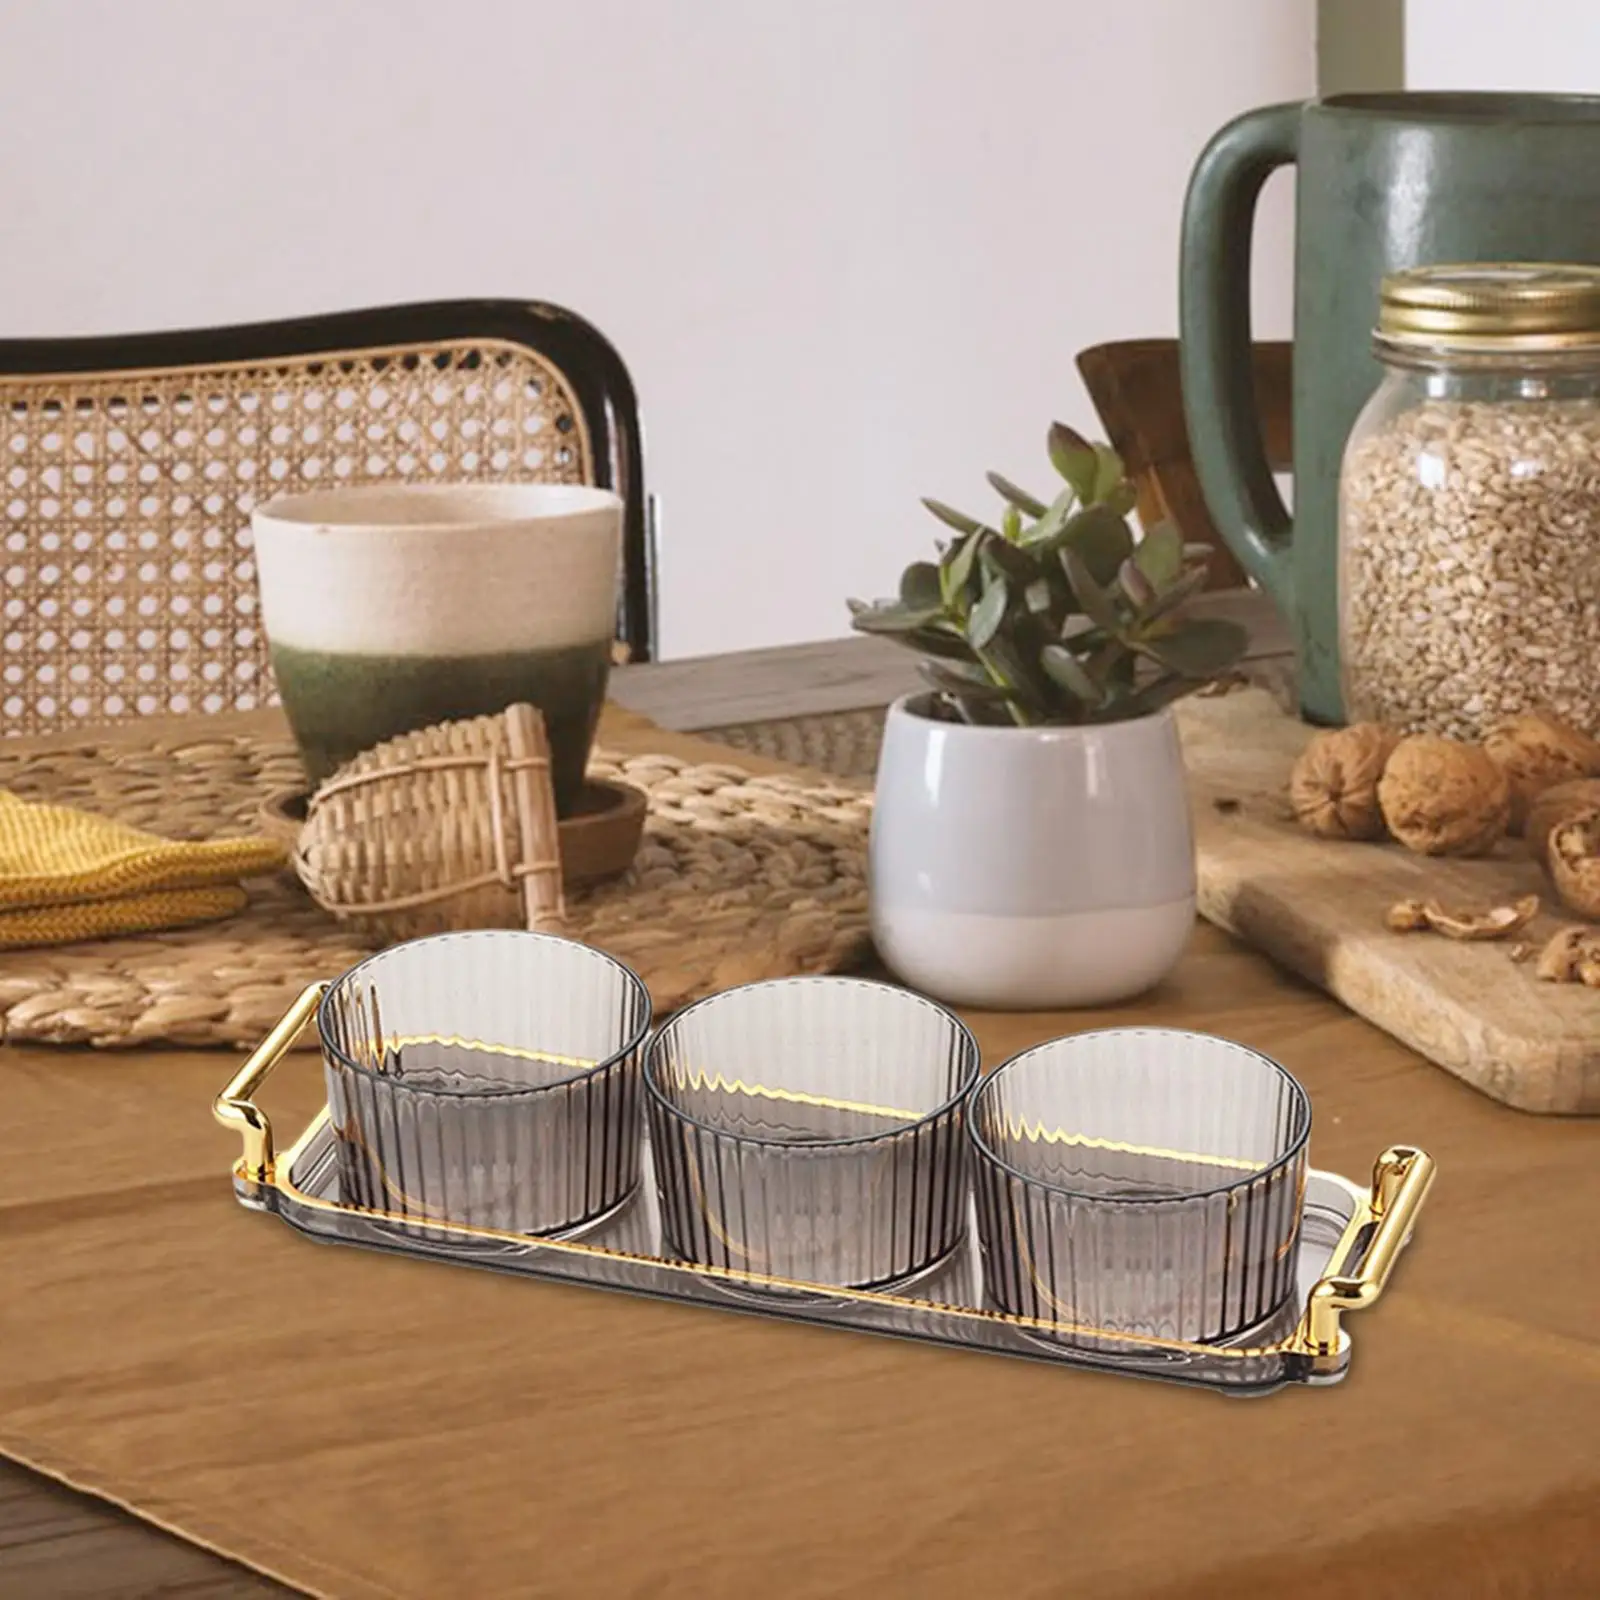 Divided Serving Platter Family Dinners and Holiday Parties Use Nuts Tray with Holder Small Serving Bowls Serving Dishes